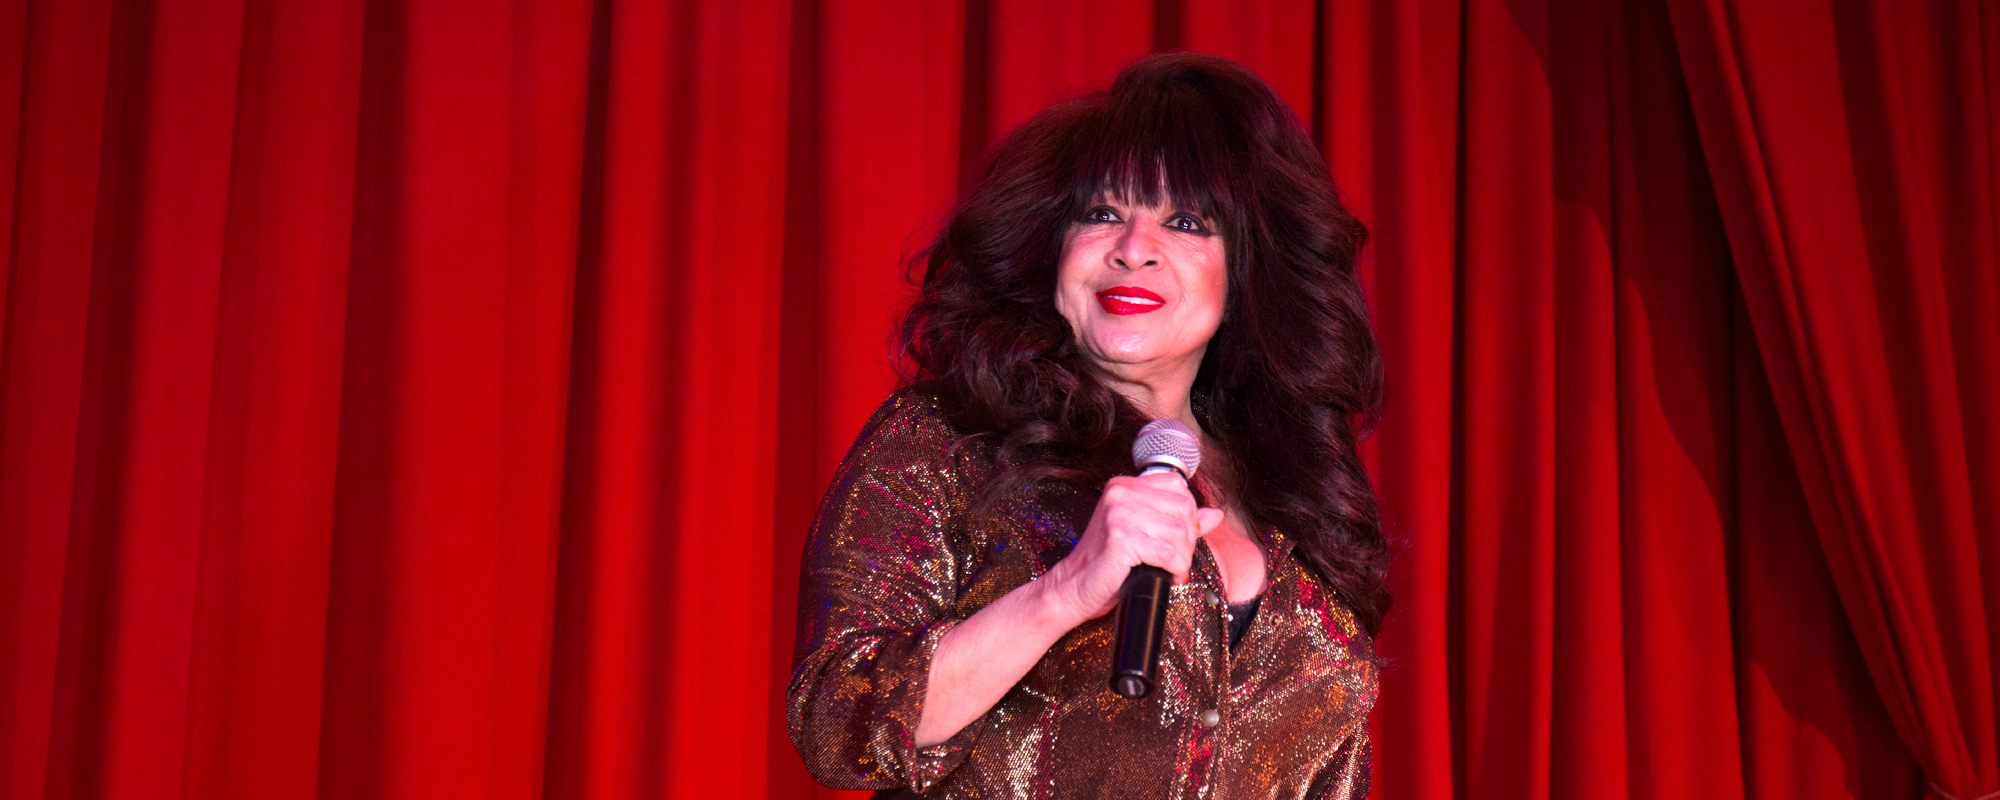 Fans React to the Passing Of Famed Singer Ronnie Spector